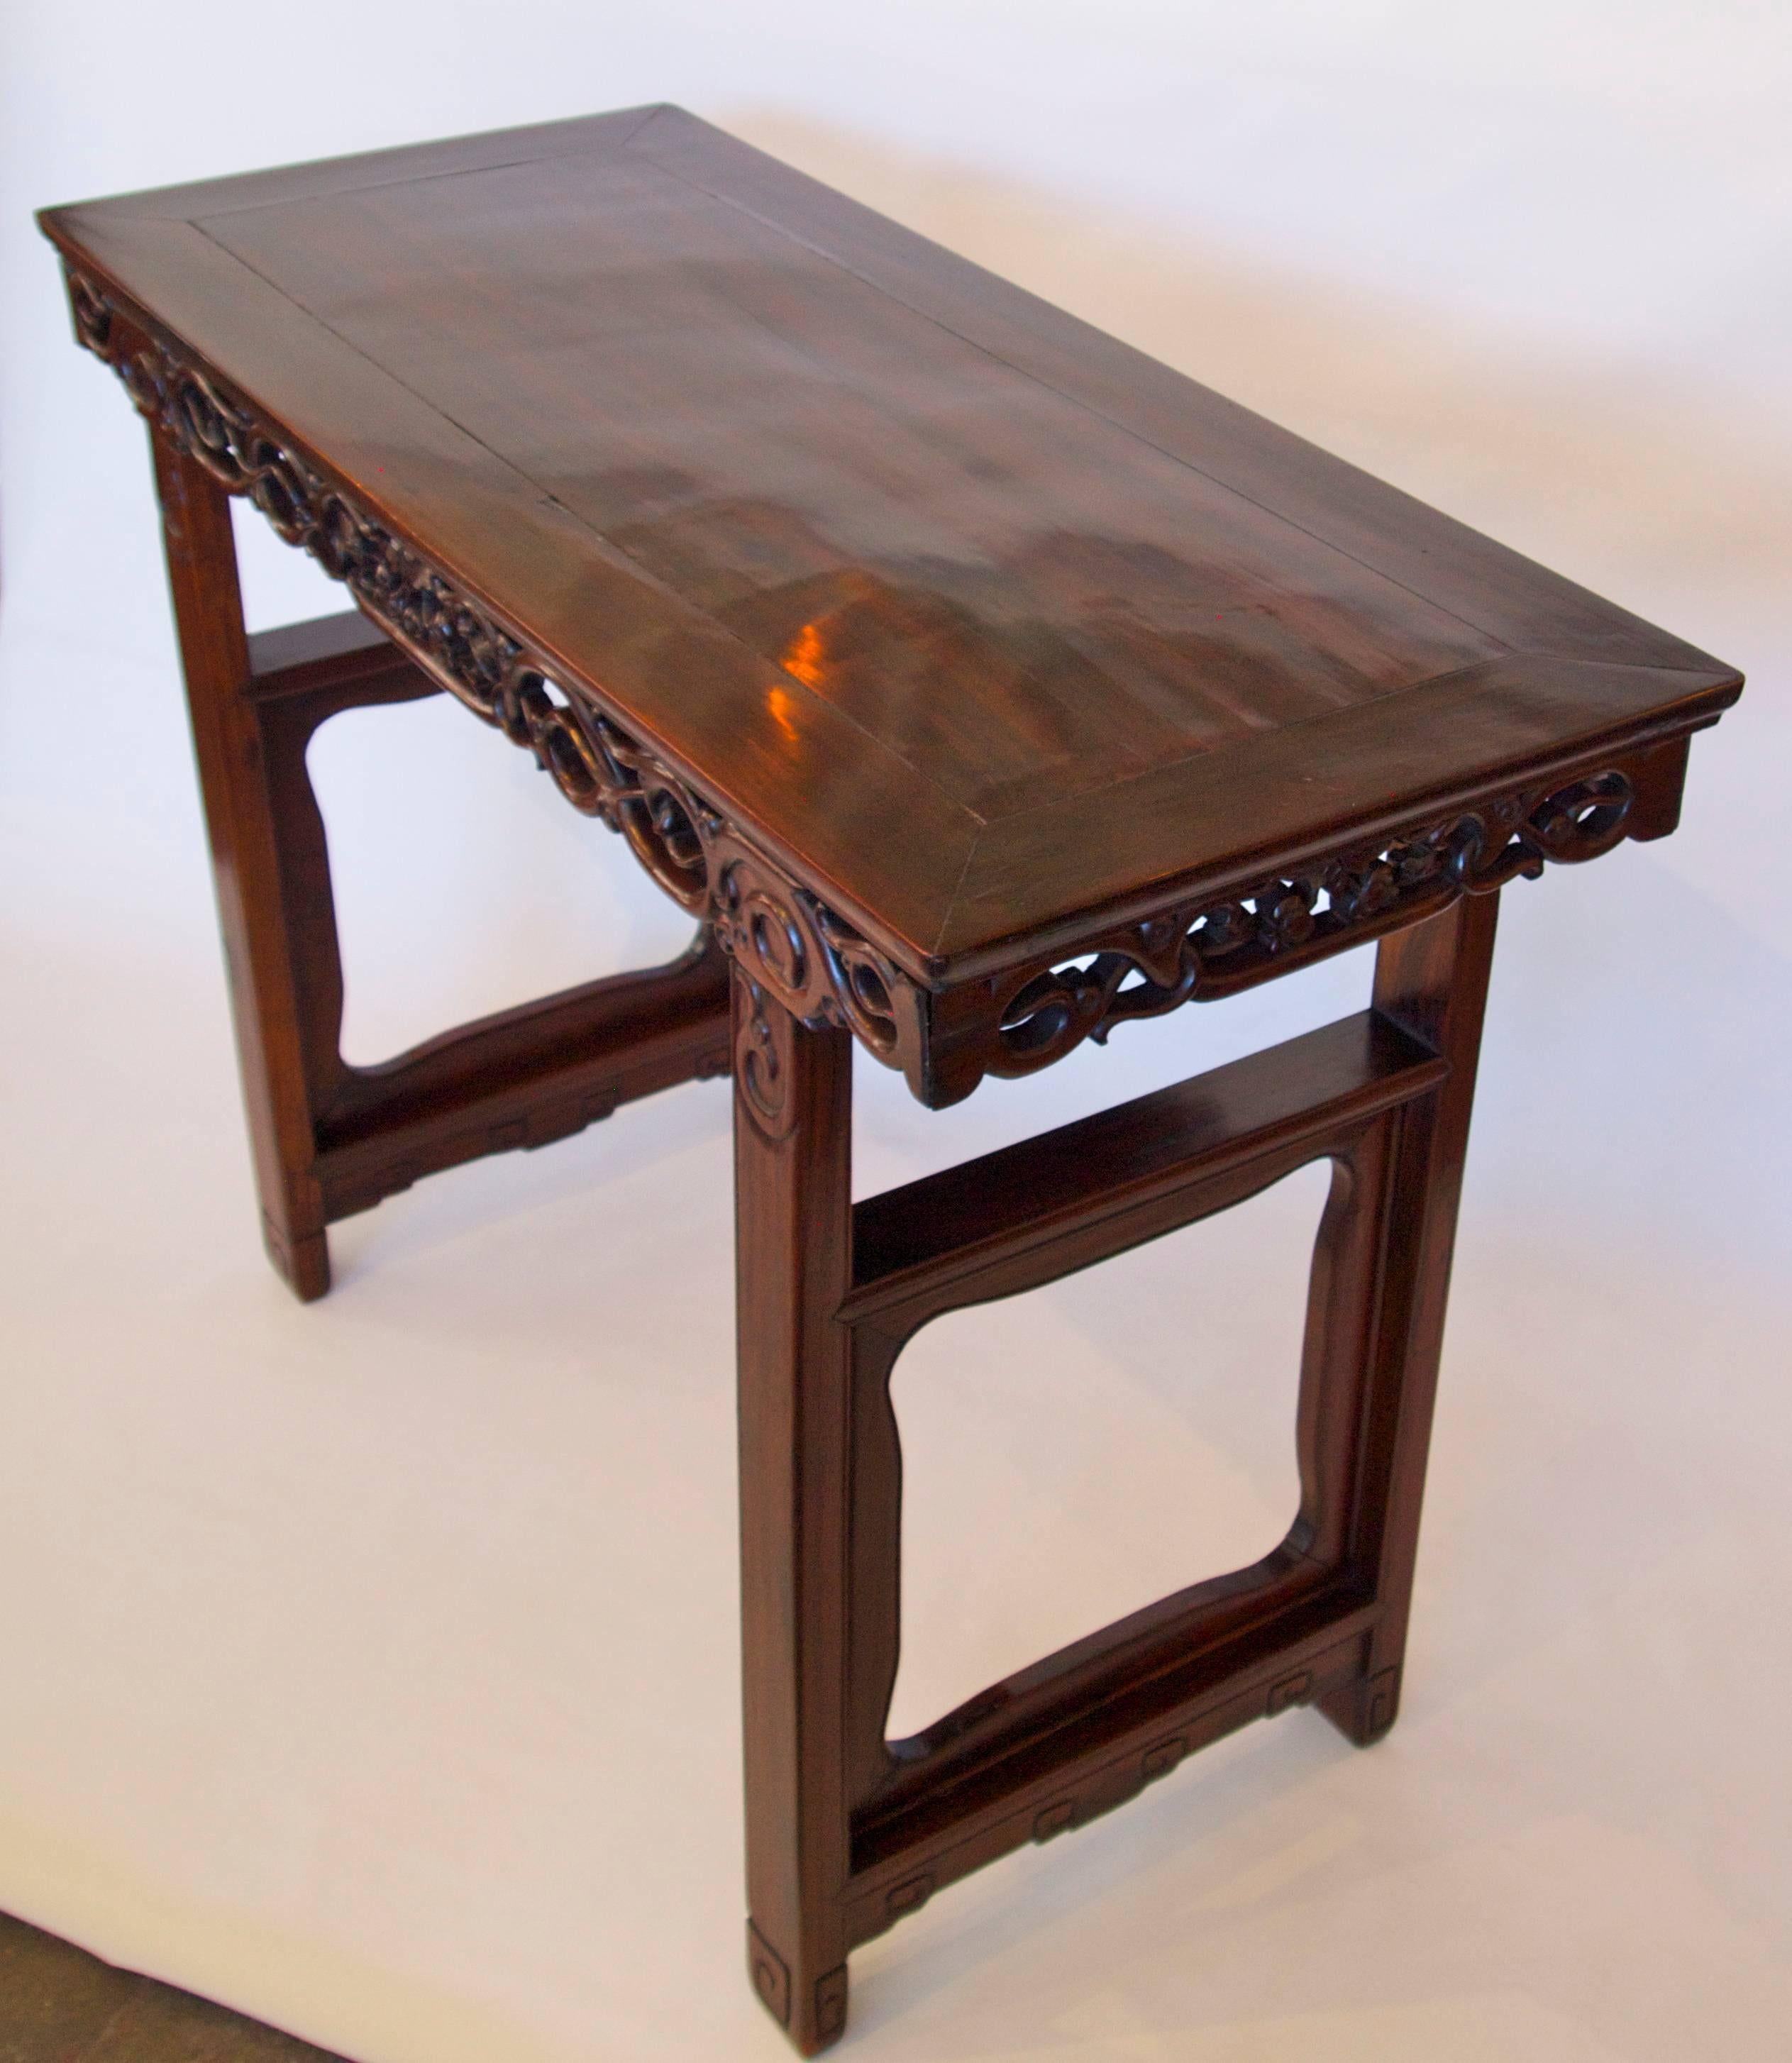 Beautiful late 19th century Chinese hongmu wood tall altar table; rectangular top fits on an elaborately carved and pierced frieze and supported by carved and shaped open end panel legs with carved scroll feet. Excellent color and patina.